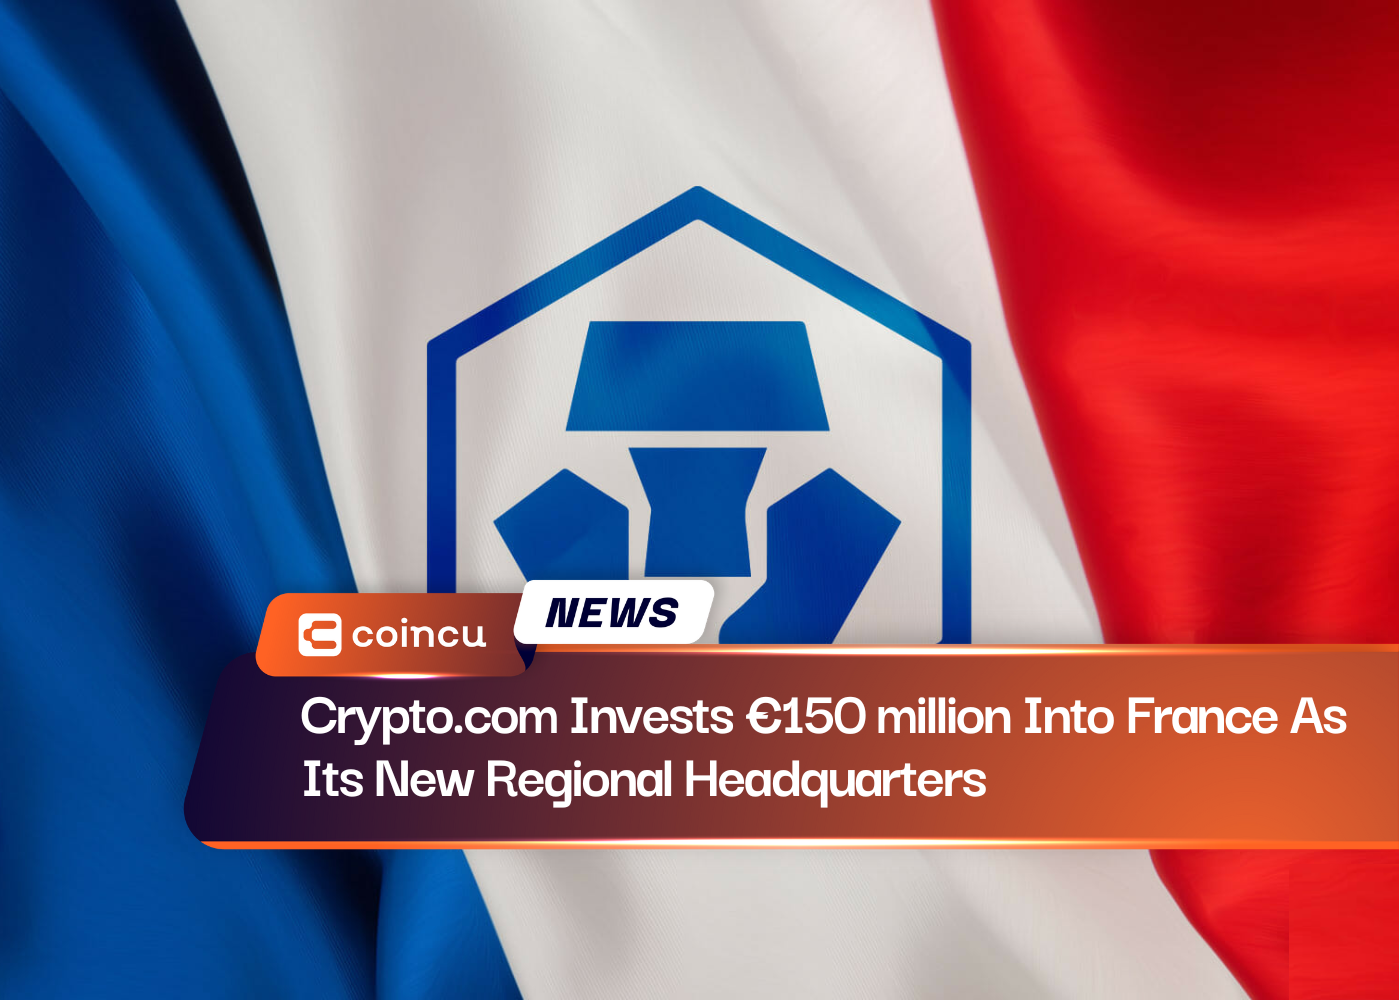 Crypto.com Invests €150 million Into France As Its New Regional Headquarters